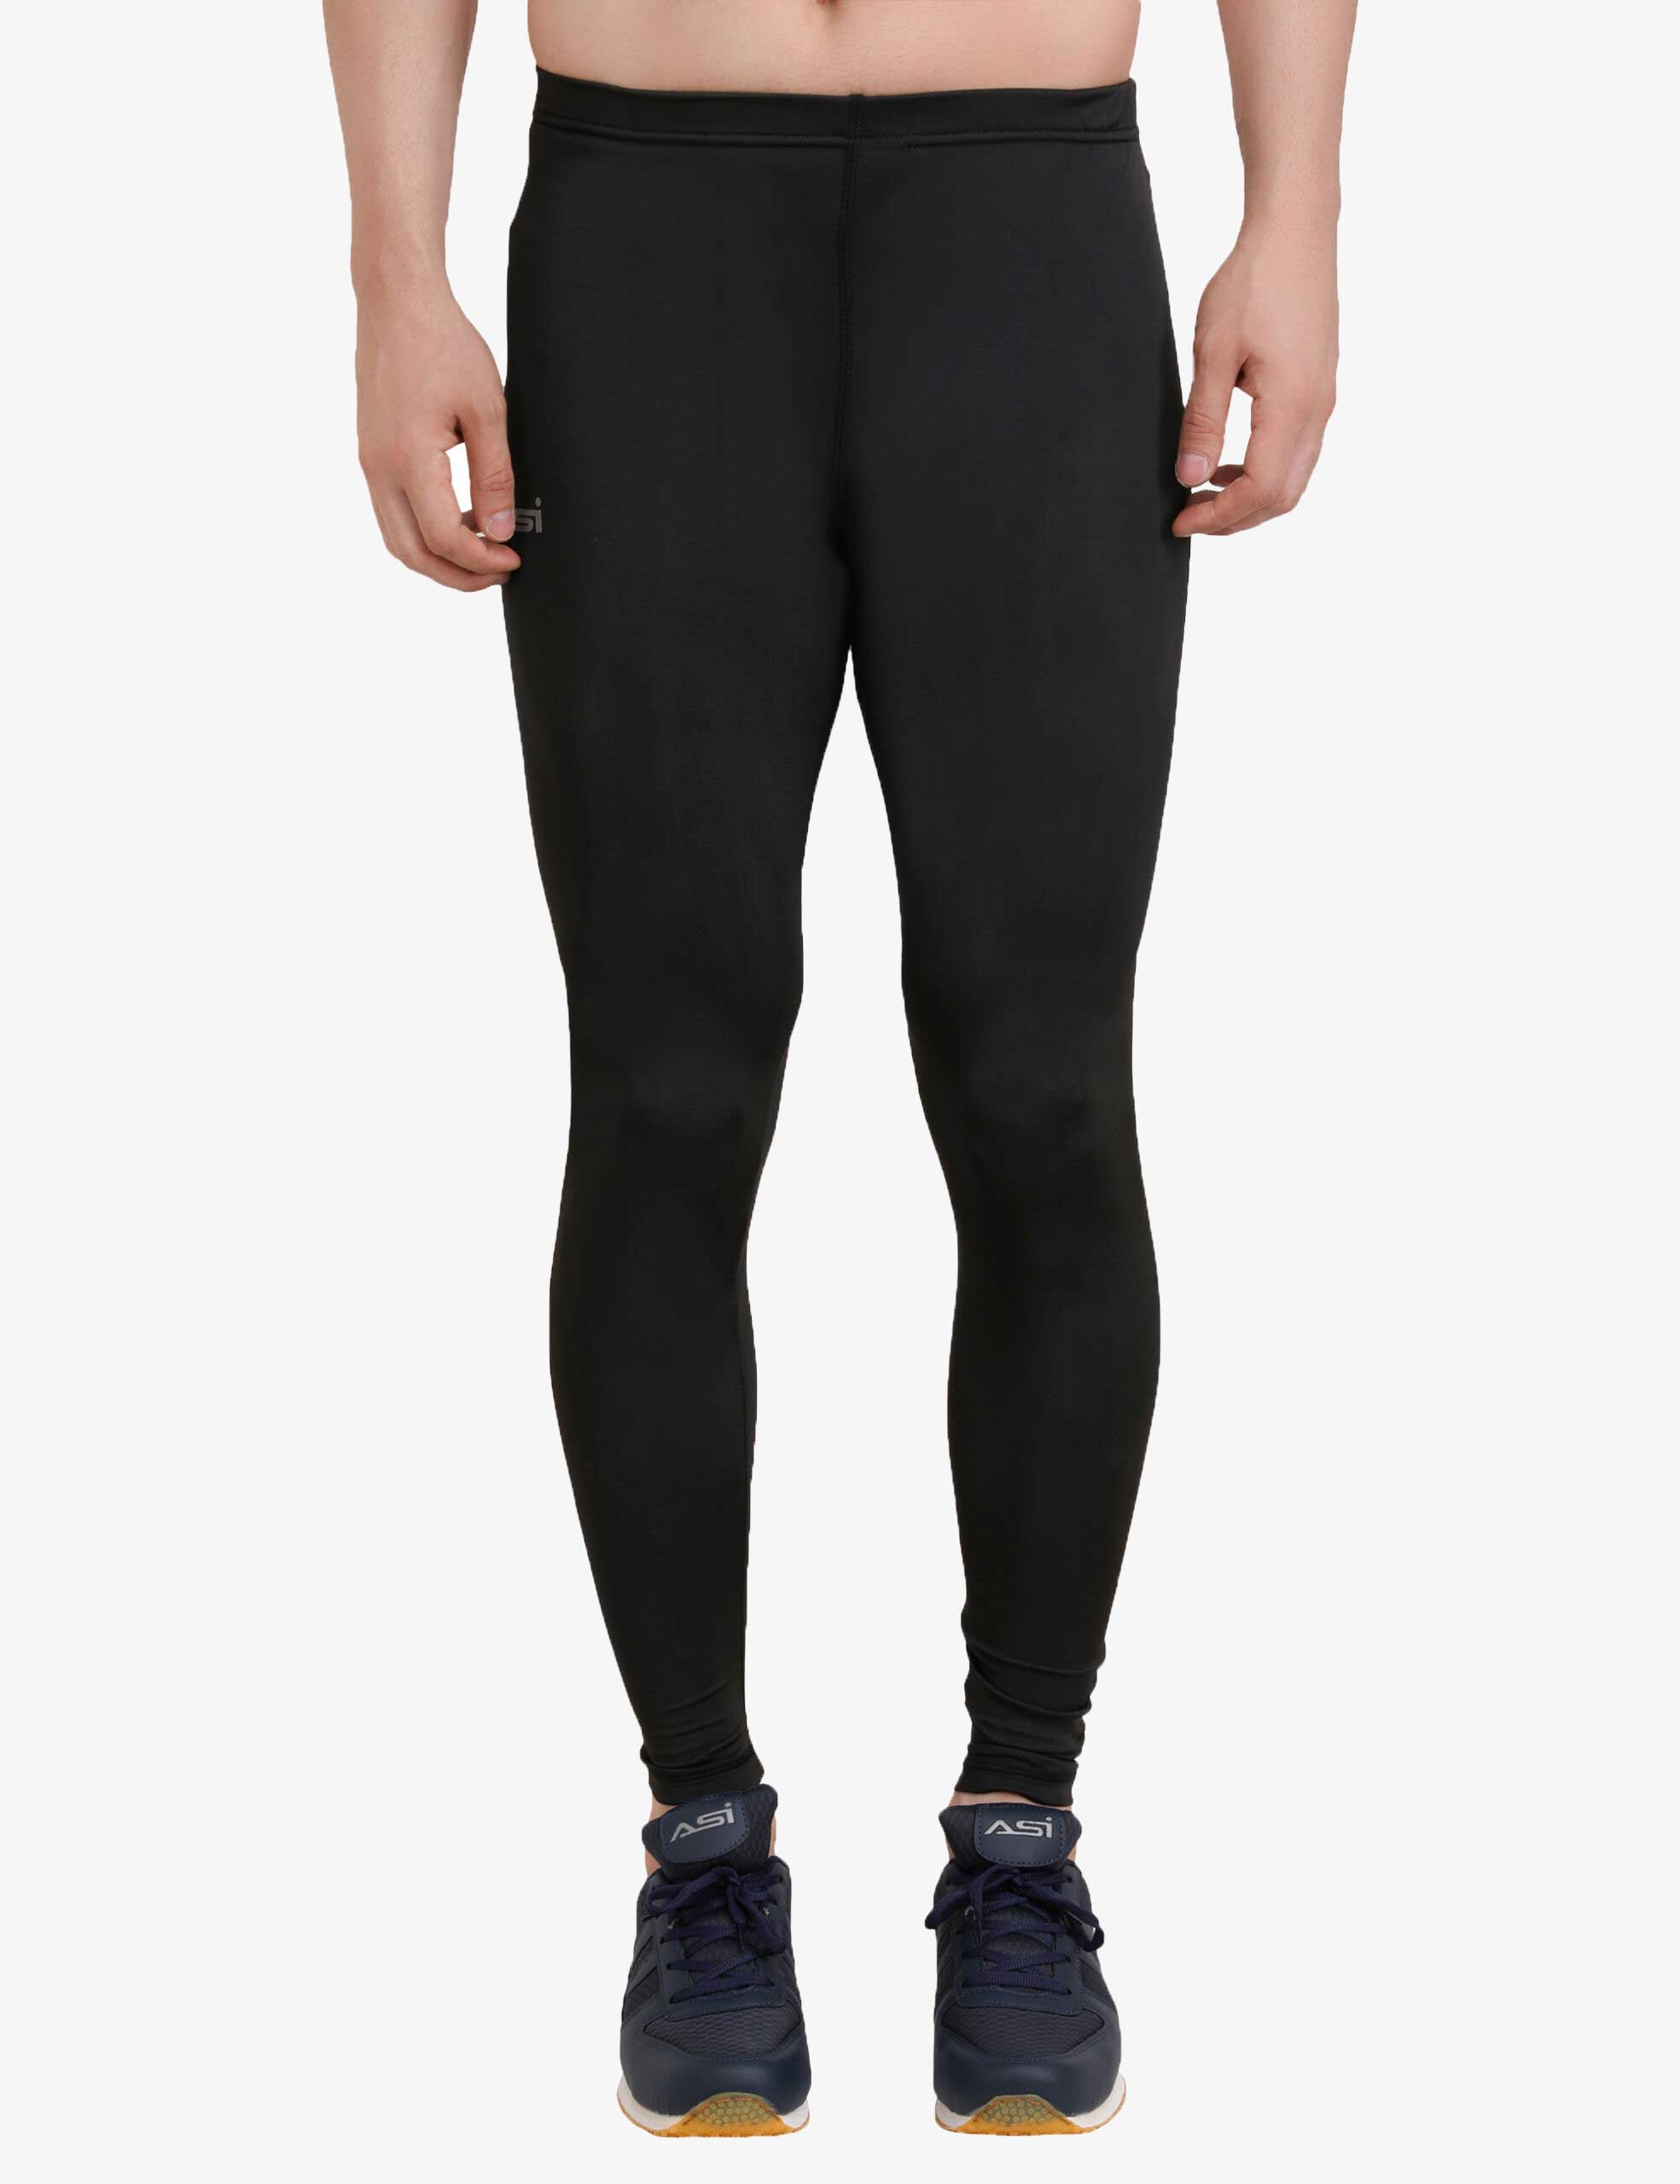 ASI Compression Wear Lower for Men